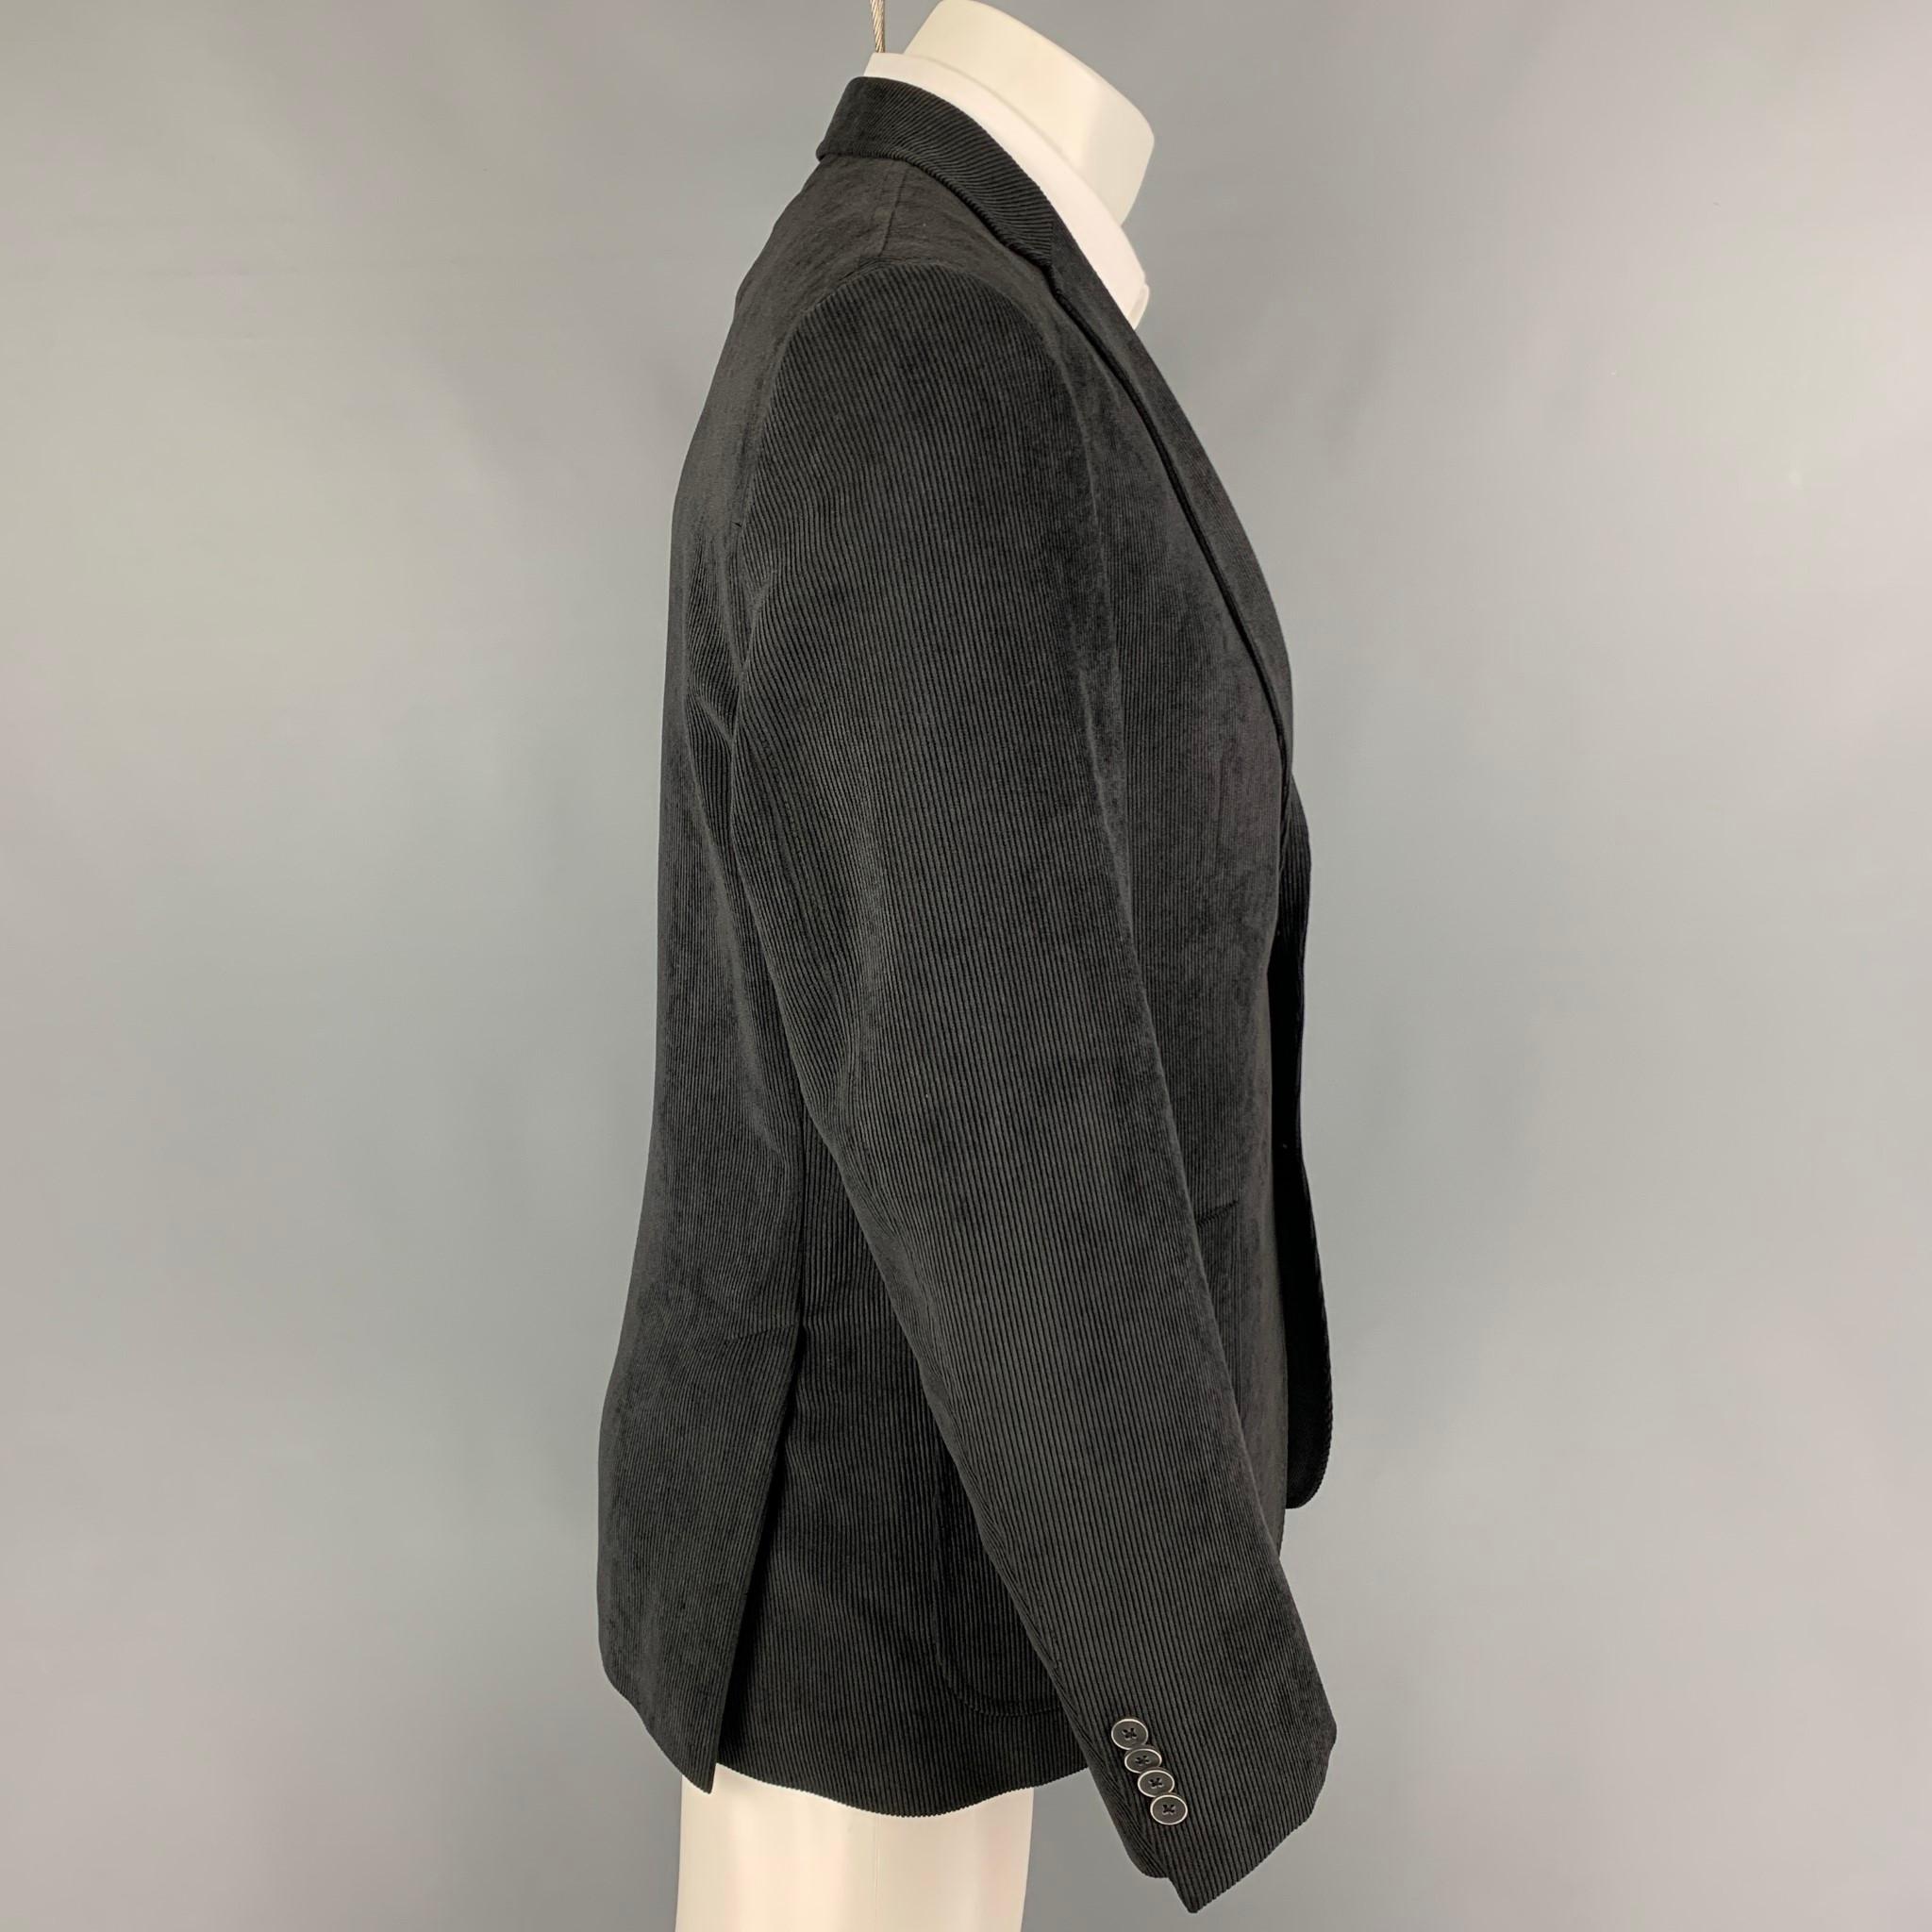 SAKS FIFTH AVENUE 'BLACK' sport coat comes in a slate corduroy polyester / polyamide with a full liner featuring a notch lapel, patch pockets, and a double button closure. 

Very Good Pre-Owned Condition.
Marked: 40 R
Original Retail Price: